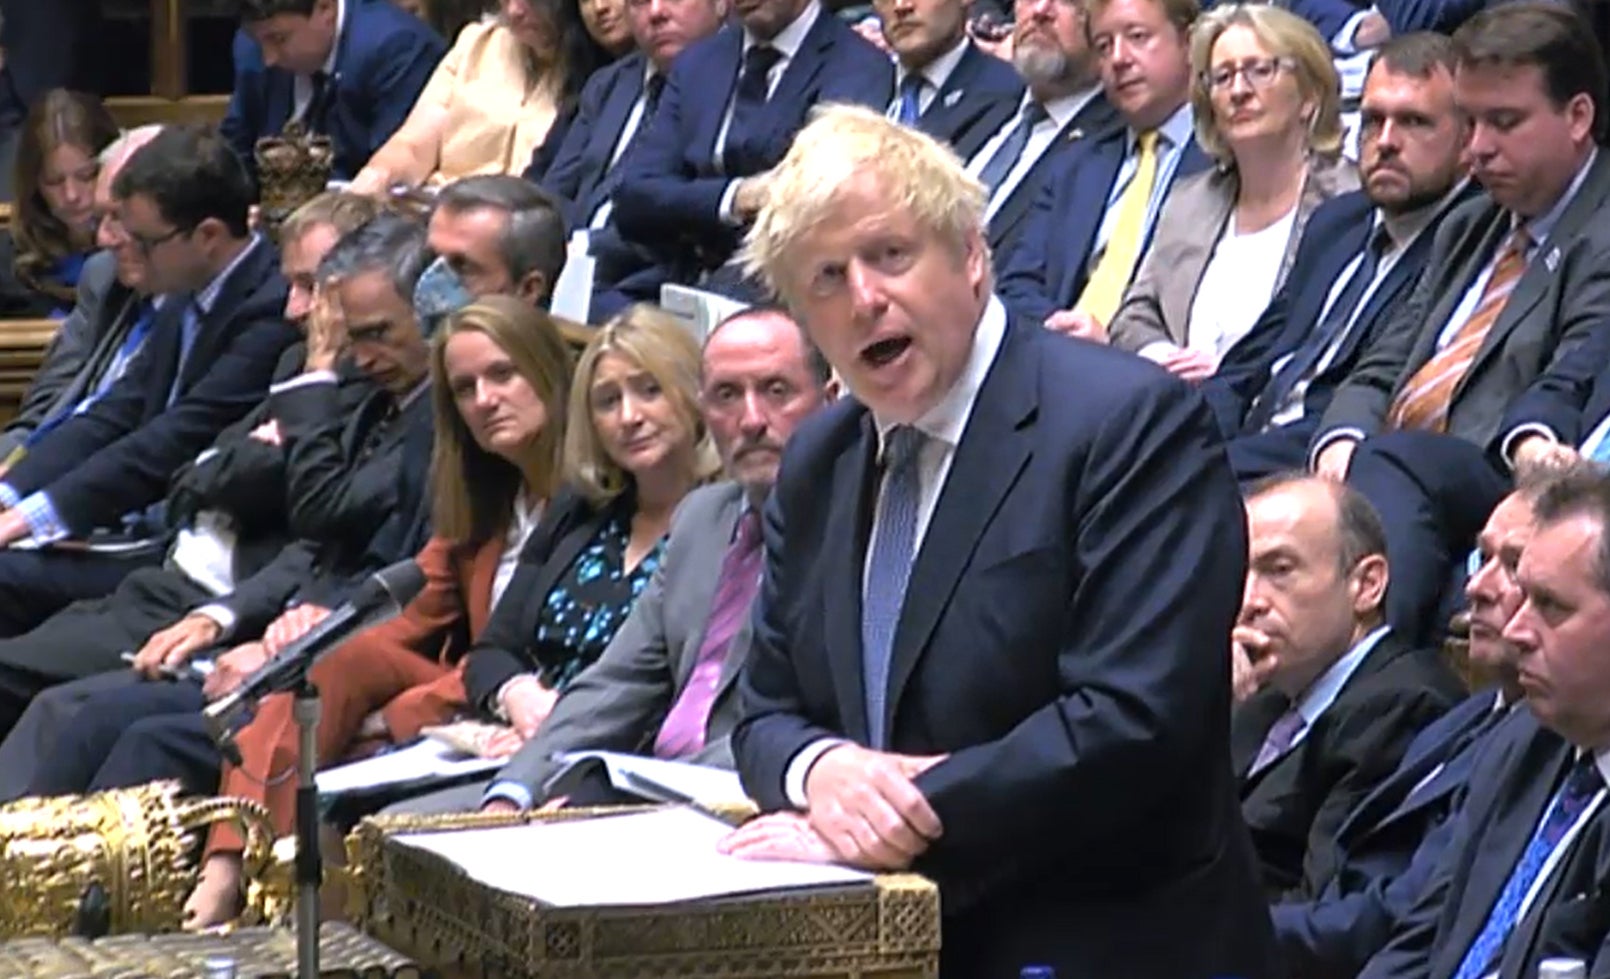 Boris Johnson apologised over the treatment of staff in the House of Commons